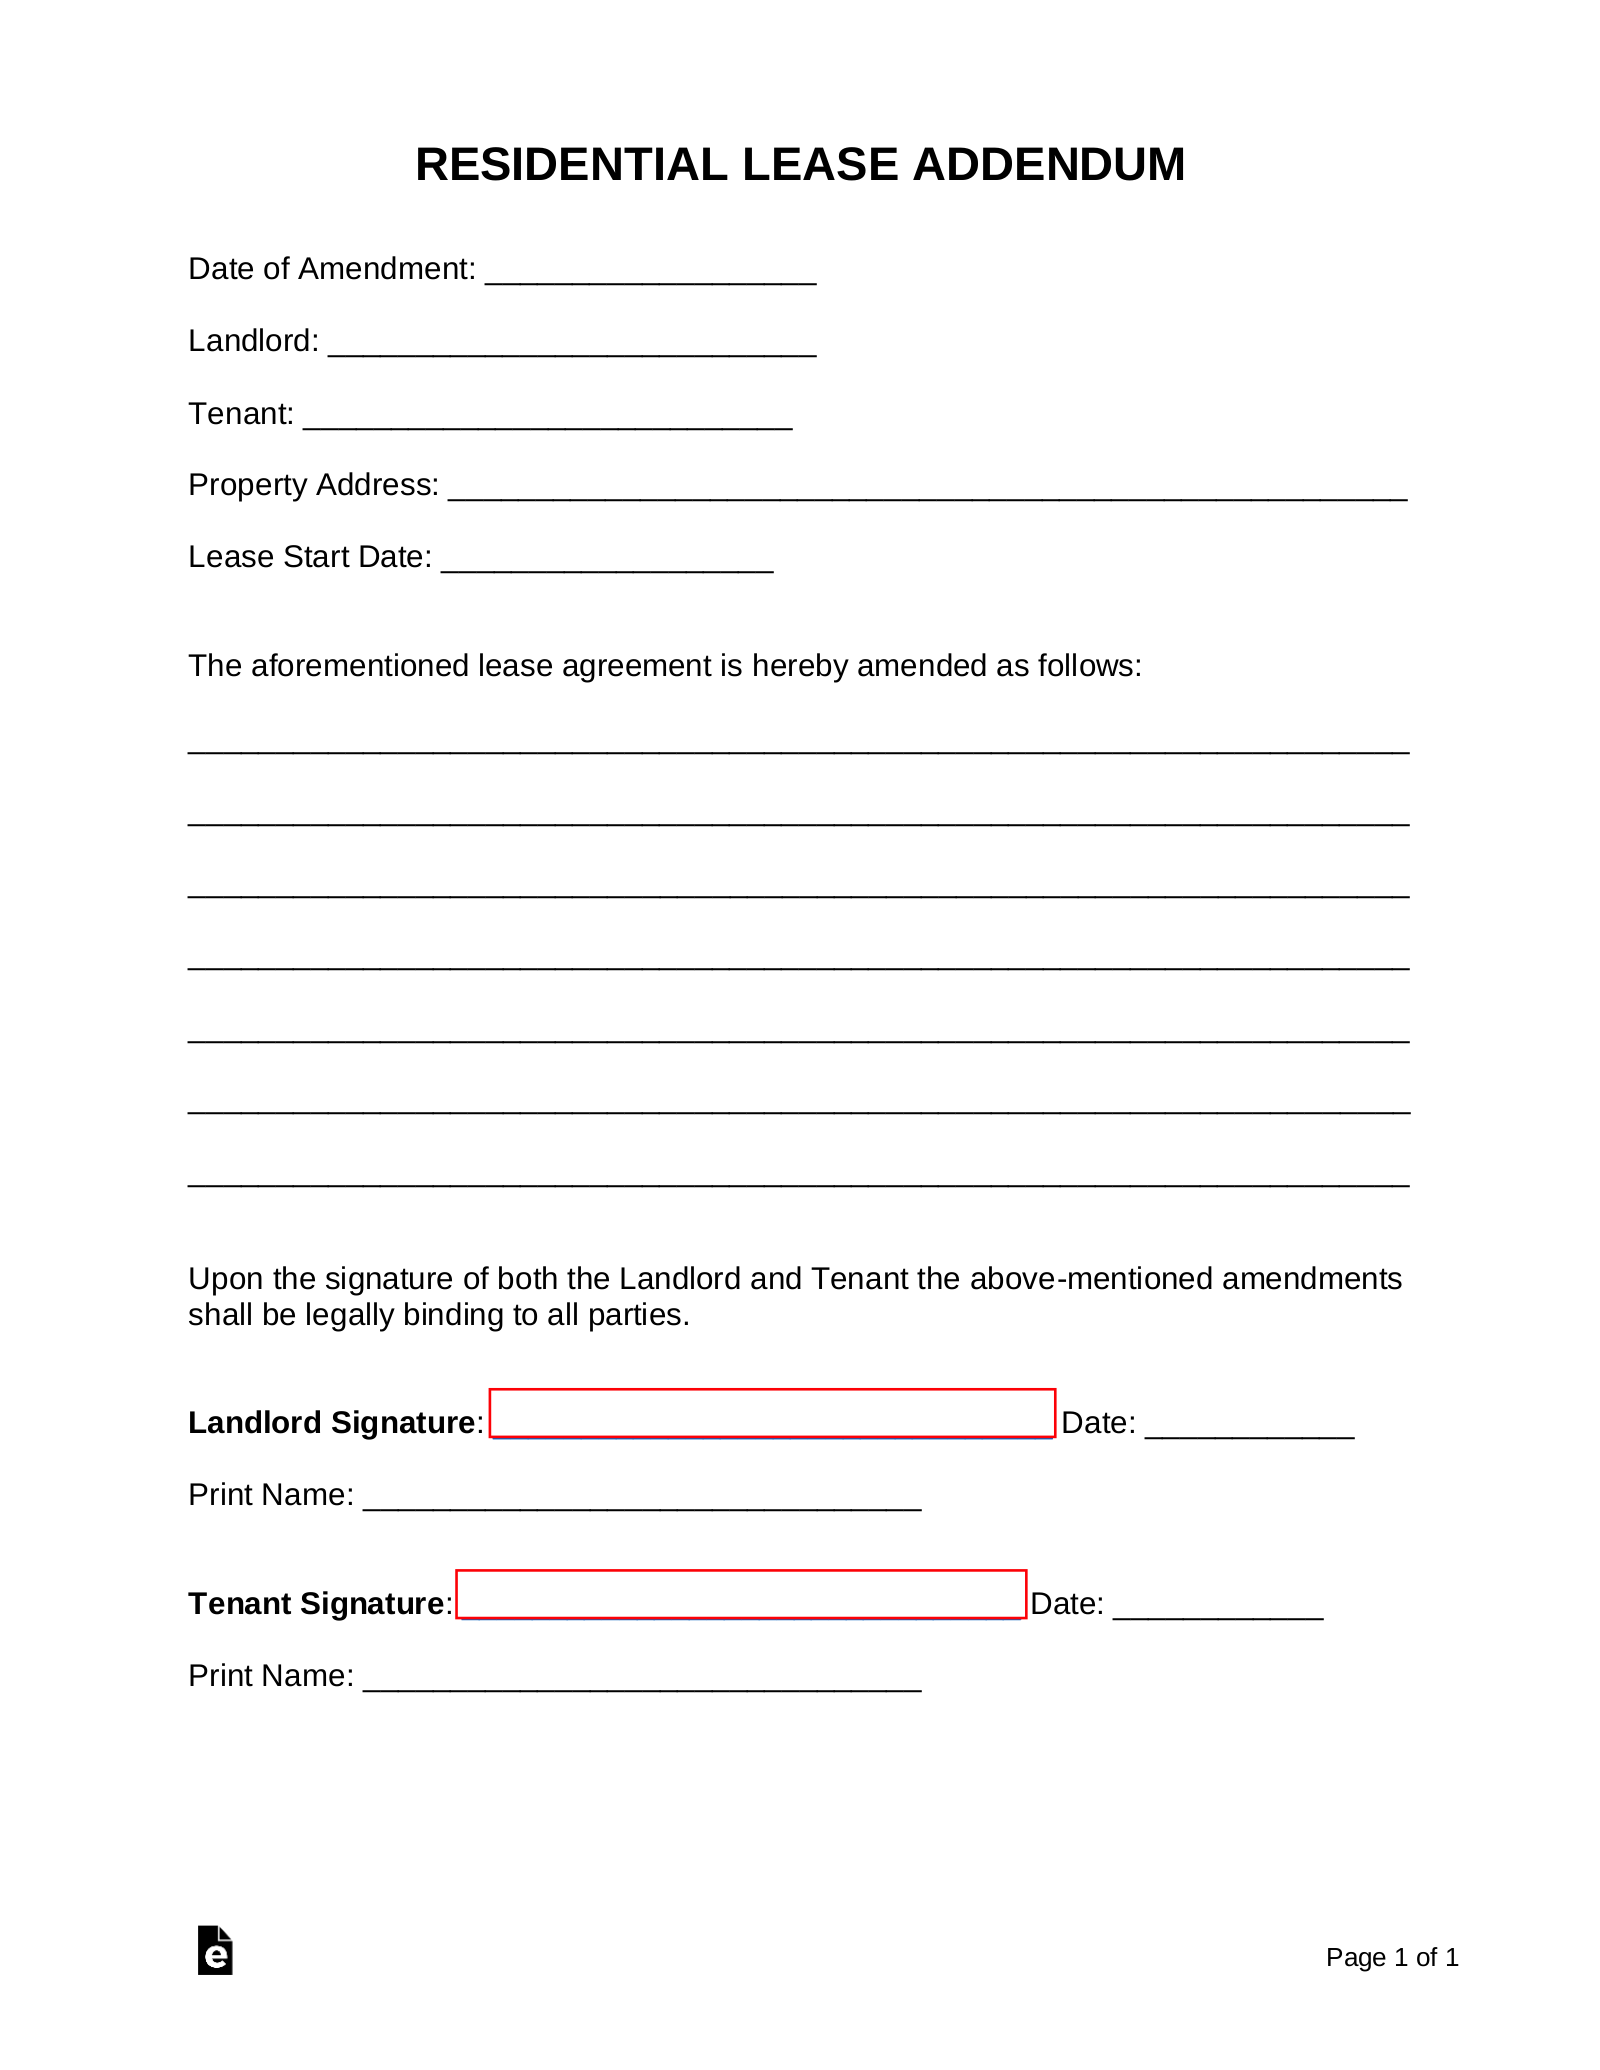 free-residential-lease-addendum-template-pdf-word-eforms